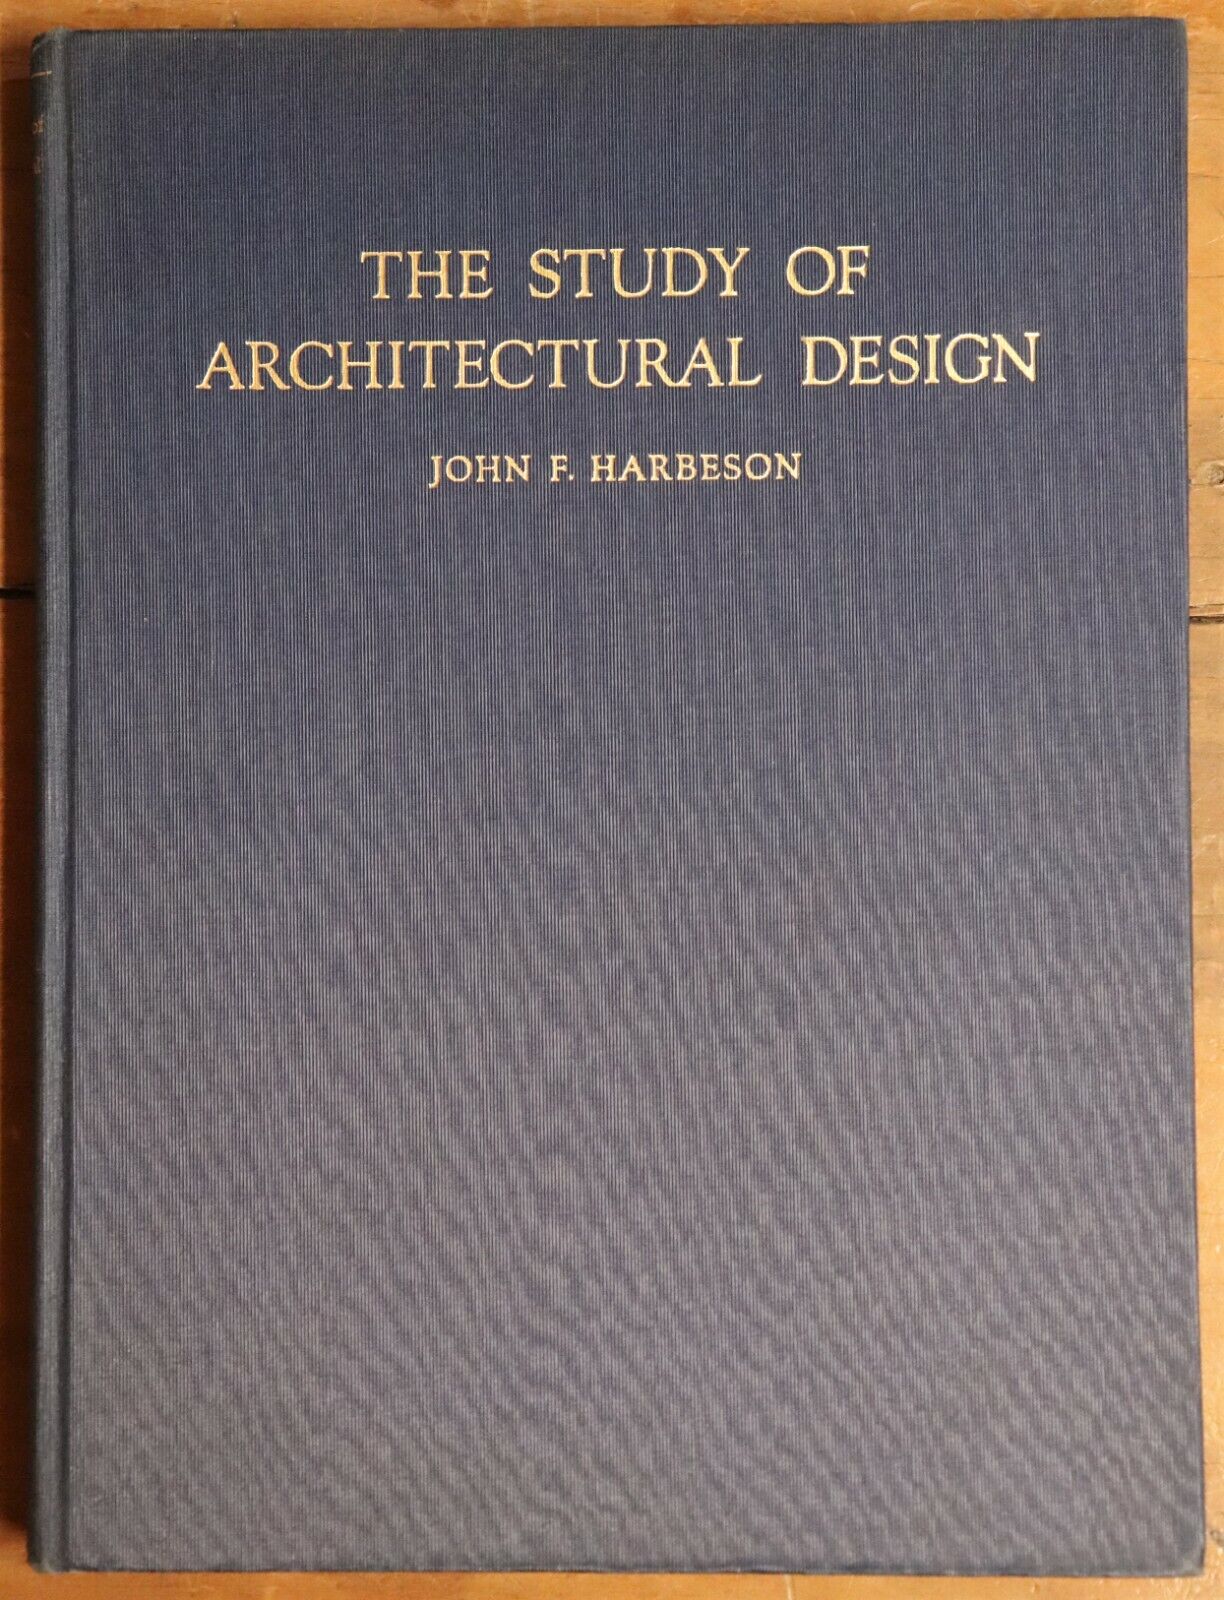 The Study of Architectural Design by JF Harbeson - 1927 - Antique Book